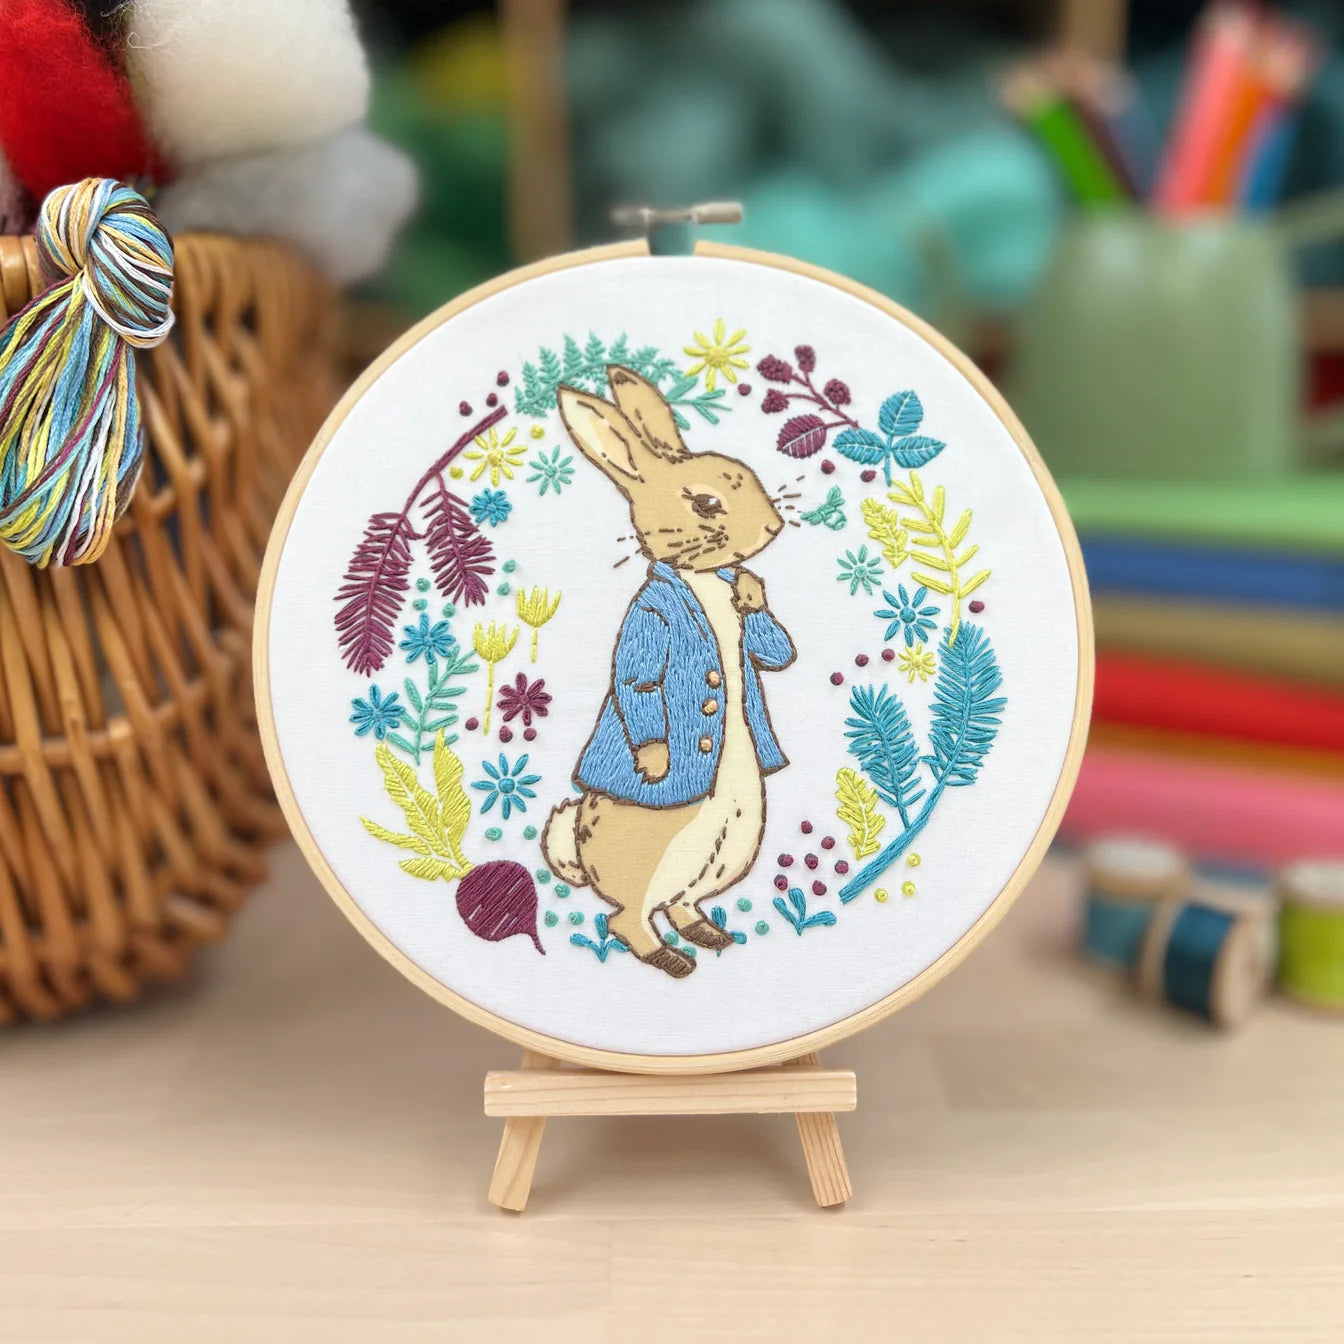 Peter Rabbit Embroidery Kit from The Crafty Kit Company